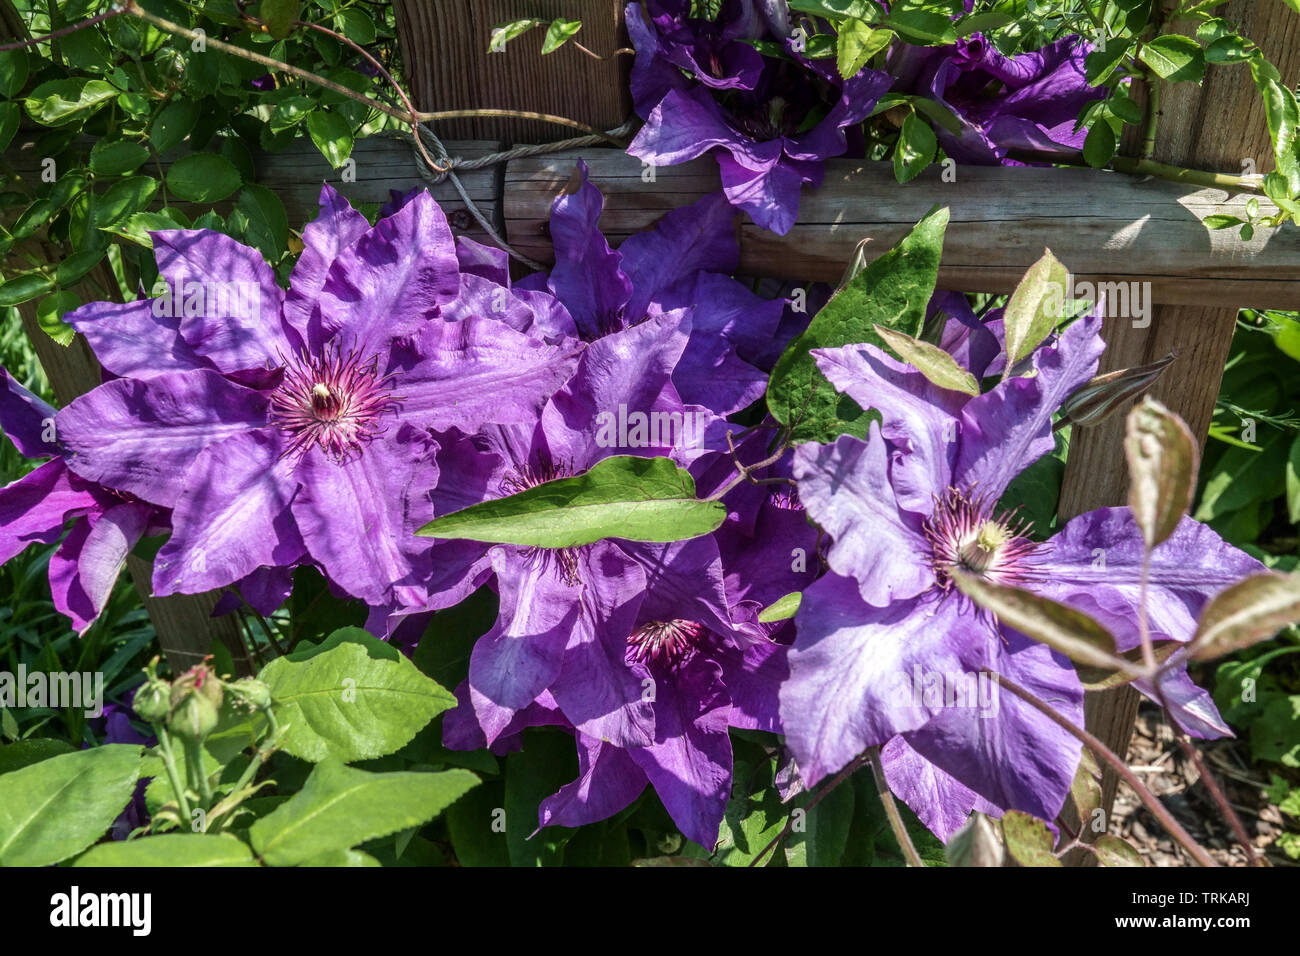 Clematis blue flower "The President", growing on wooden fence in garden Stock Photo